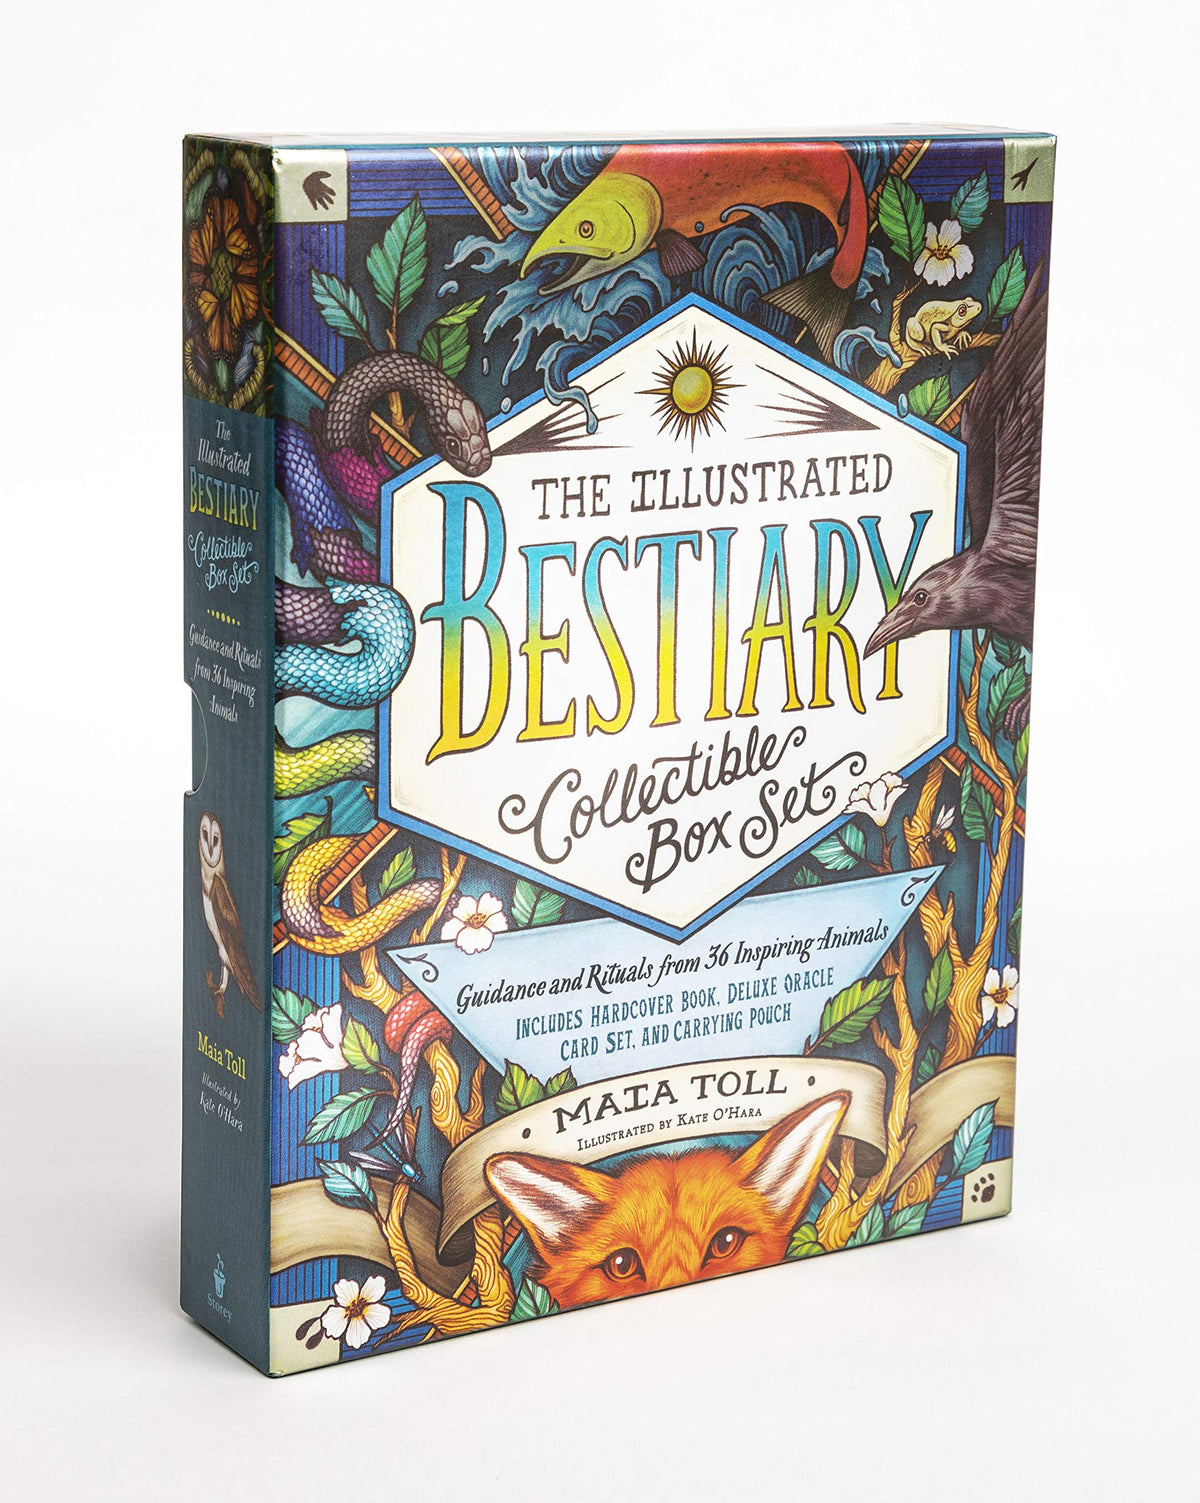 Illustrated Bestiary Collectible Box Set